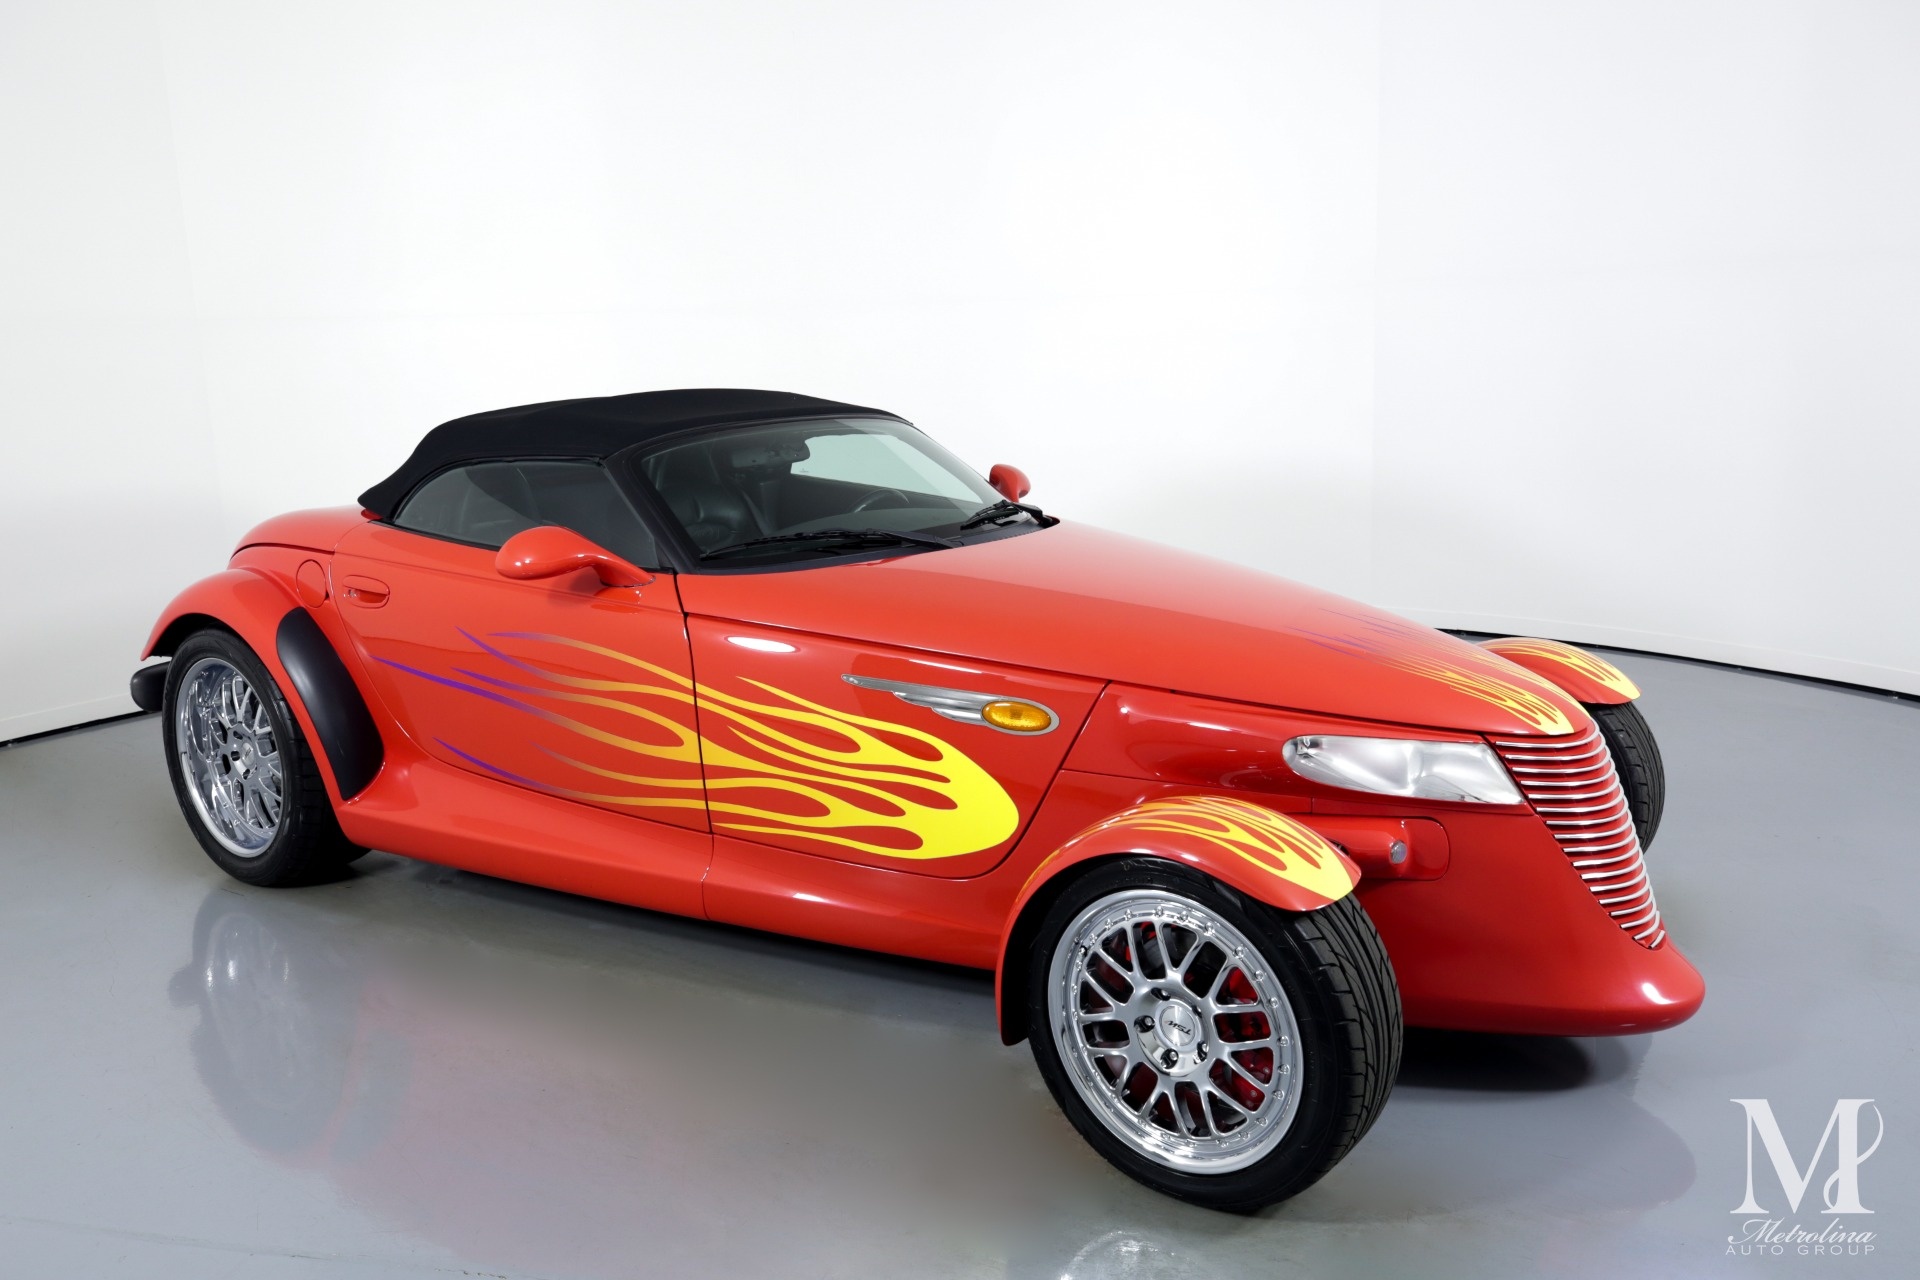 Plymouth Prowler, Used car for sale, Metrolina Auto Group, Stock 504485, 1920x1280 HD Desktop